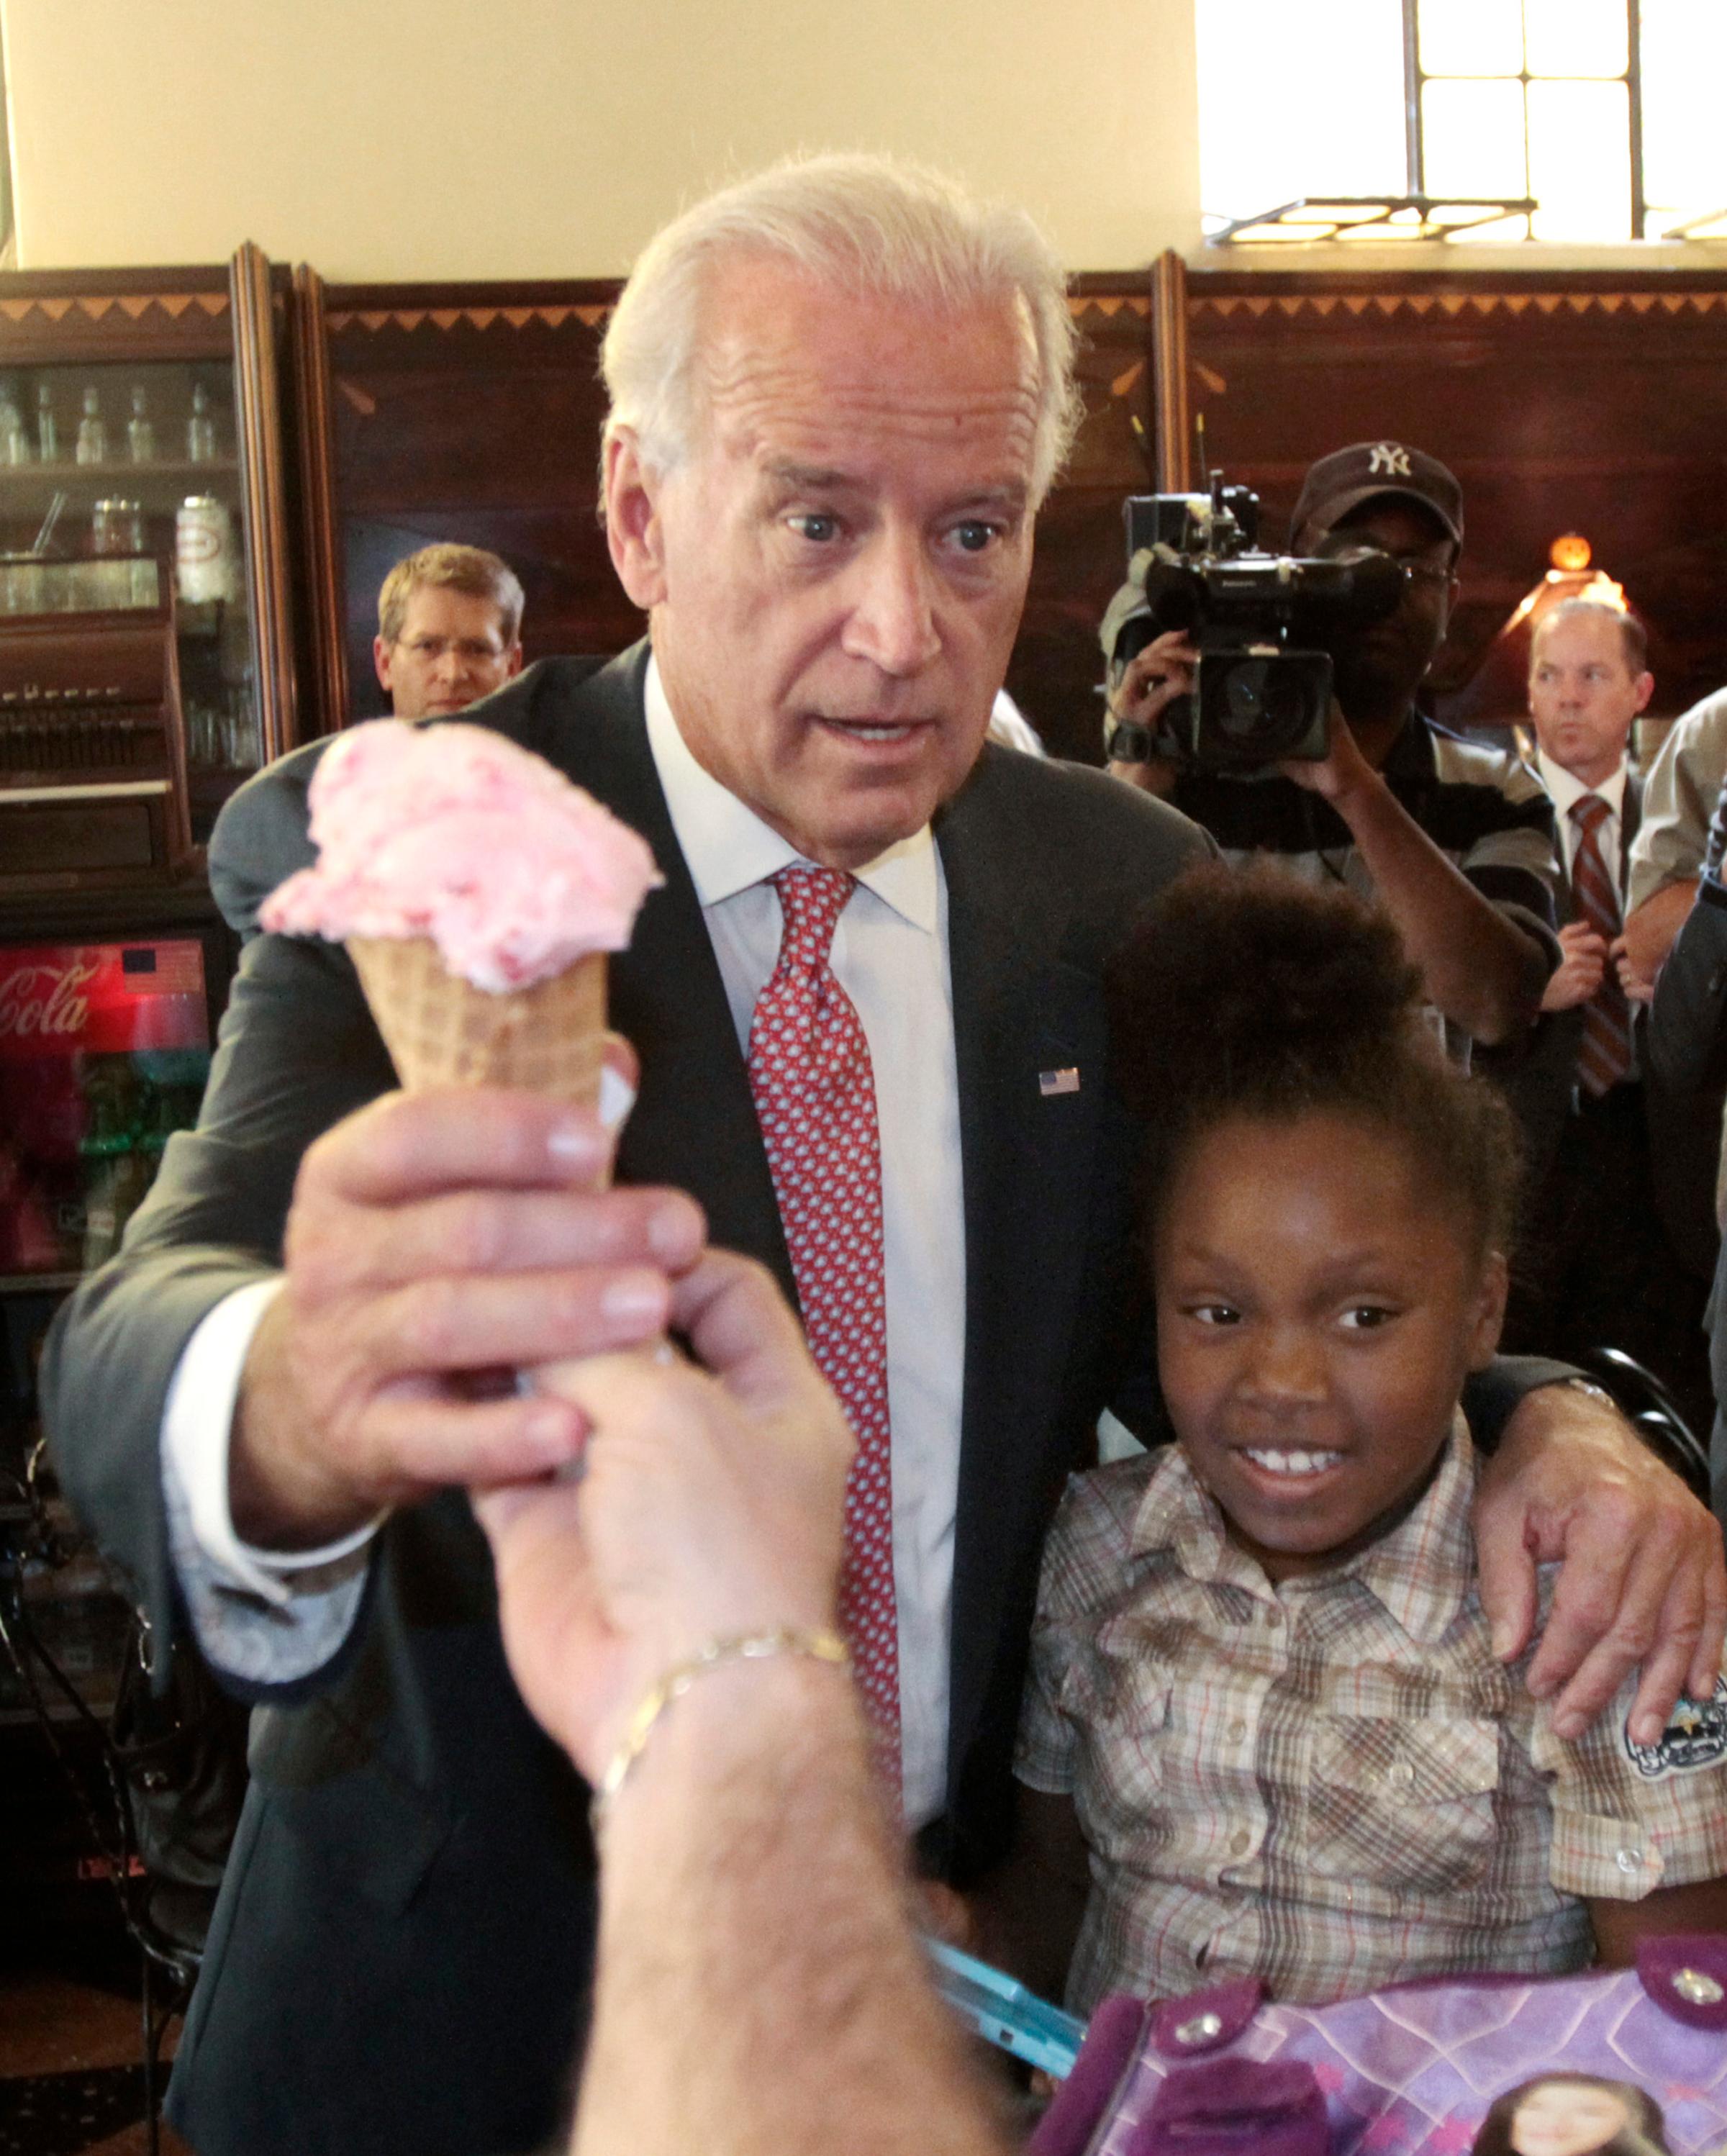 Joe Biden gets a "Whitehouse Cherry" flavored ice-cream cone with his arm around 9-year Dizney Stephens during a visit to Klavon's Authentic 1920's ice cream parlor in Pittsburgh, on Oct. 11, 2010.